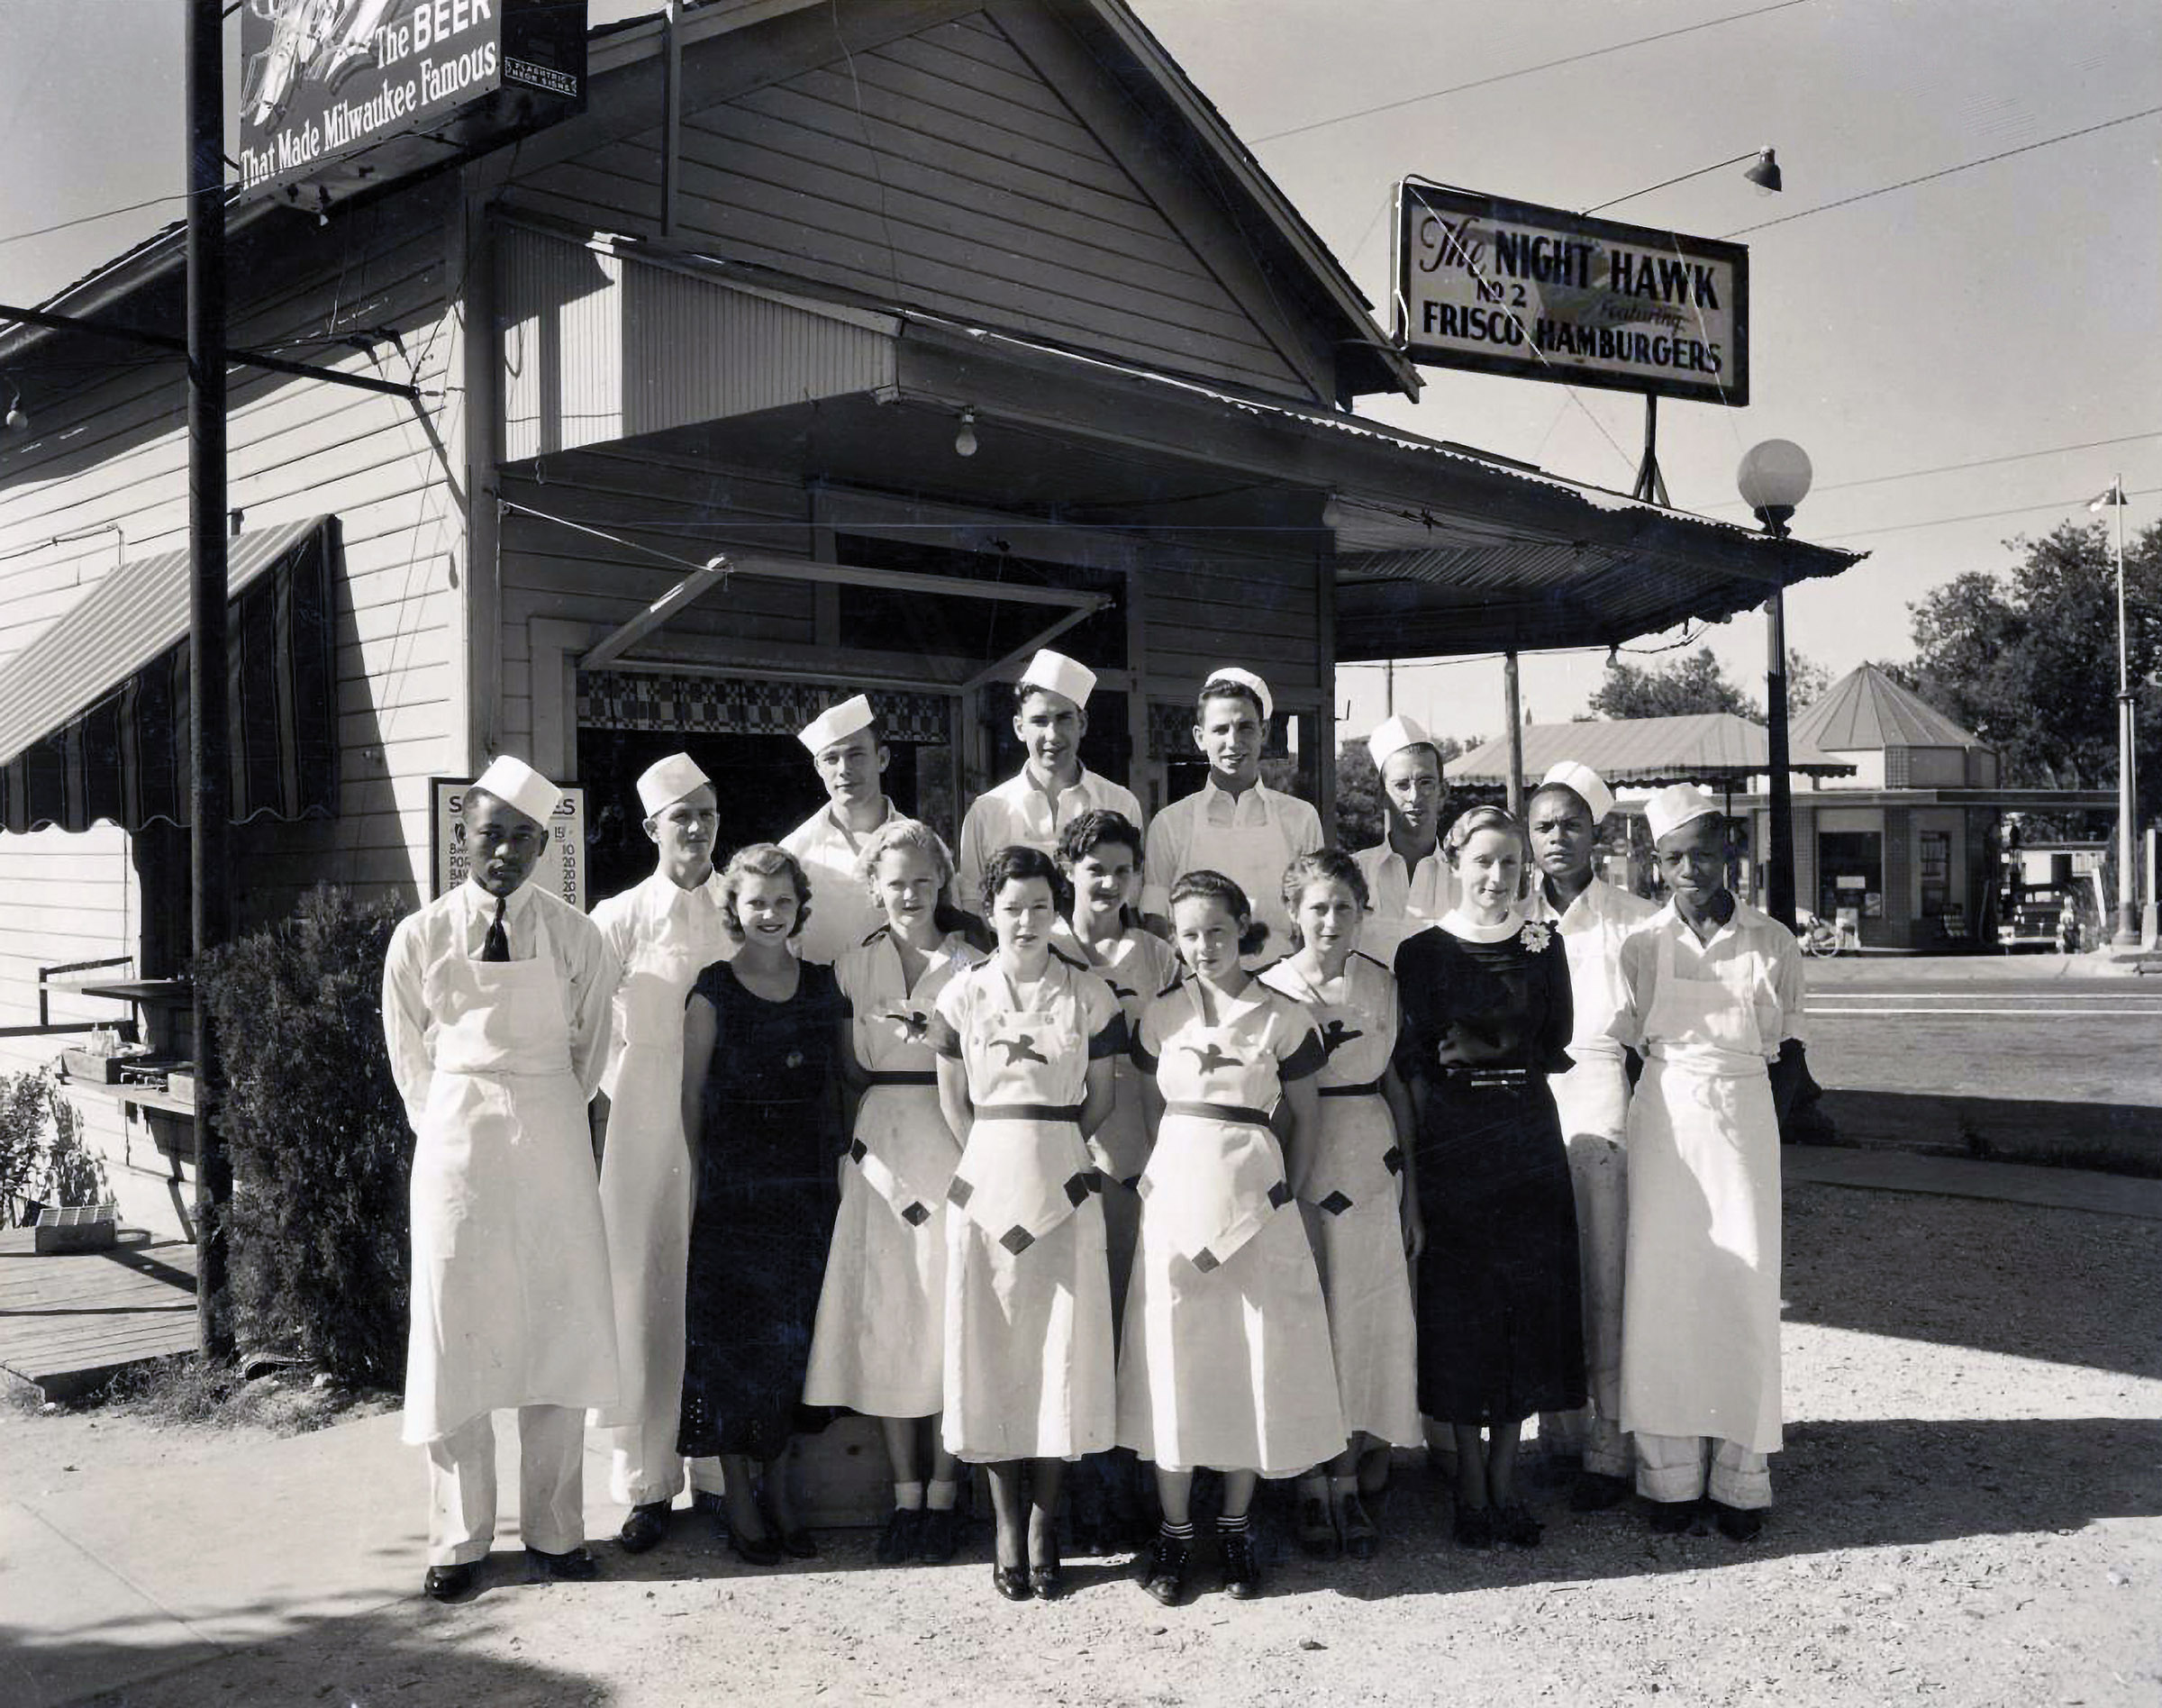 A group of people dressed in crisp white uniforms stand outside of a building in a black and white picture